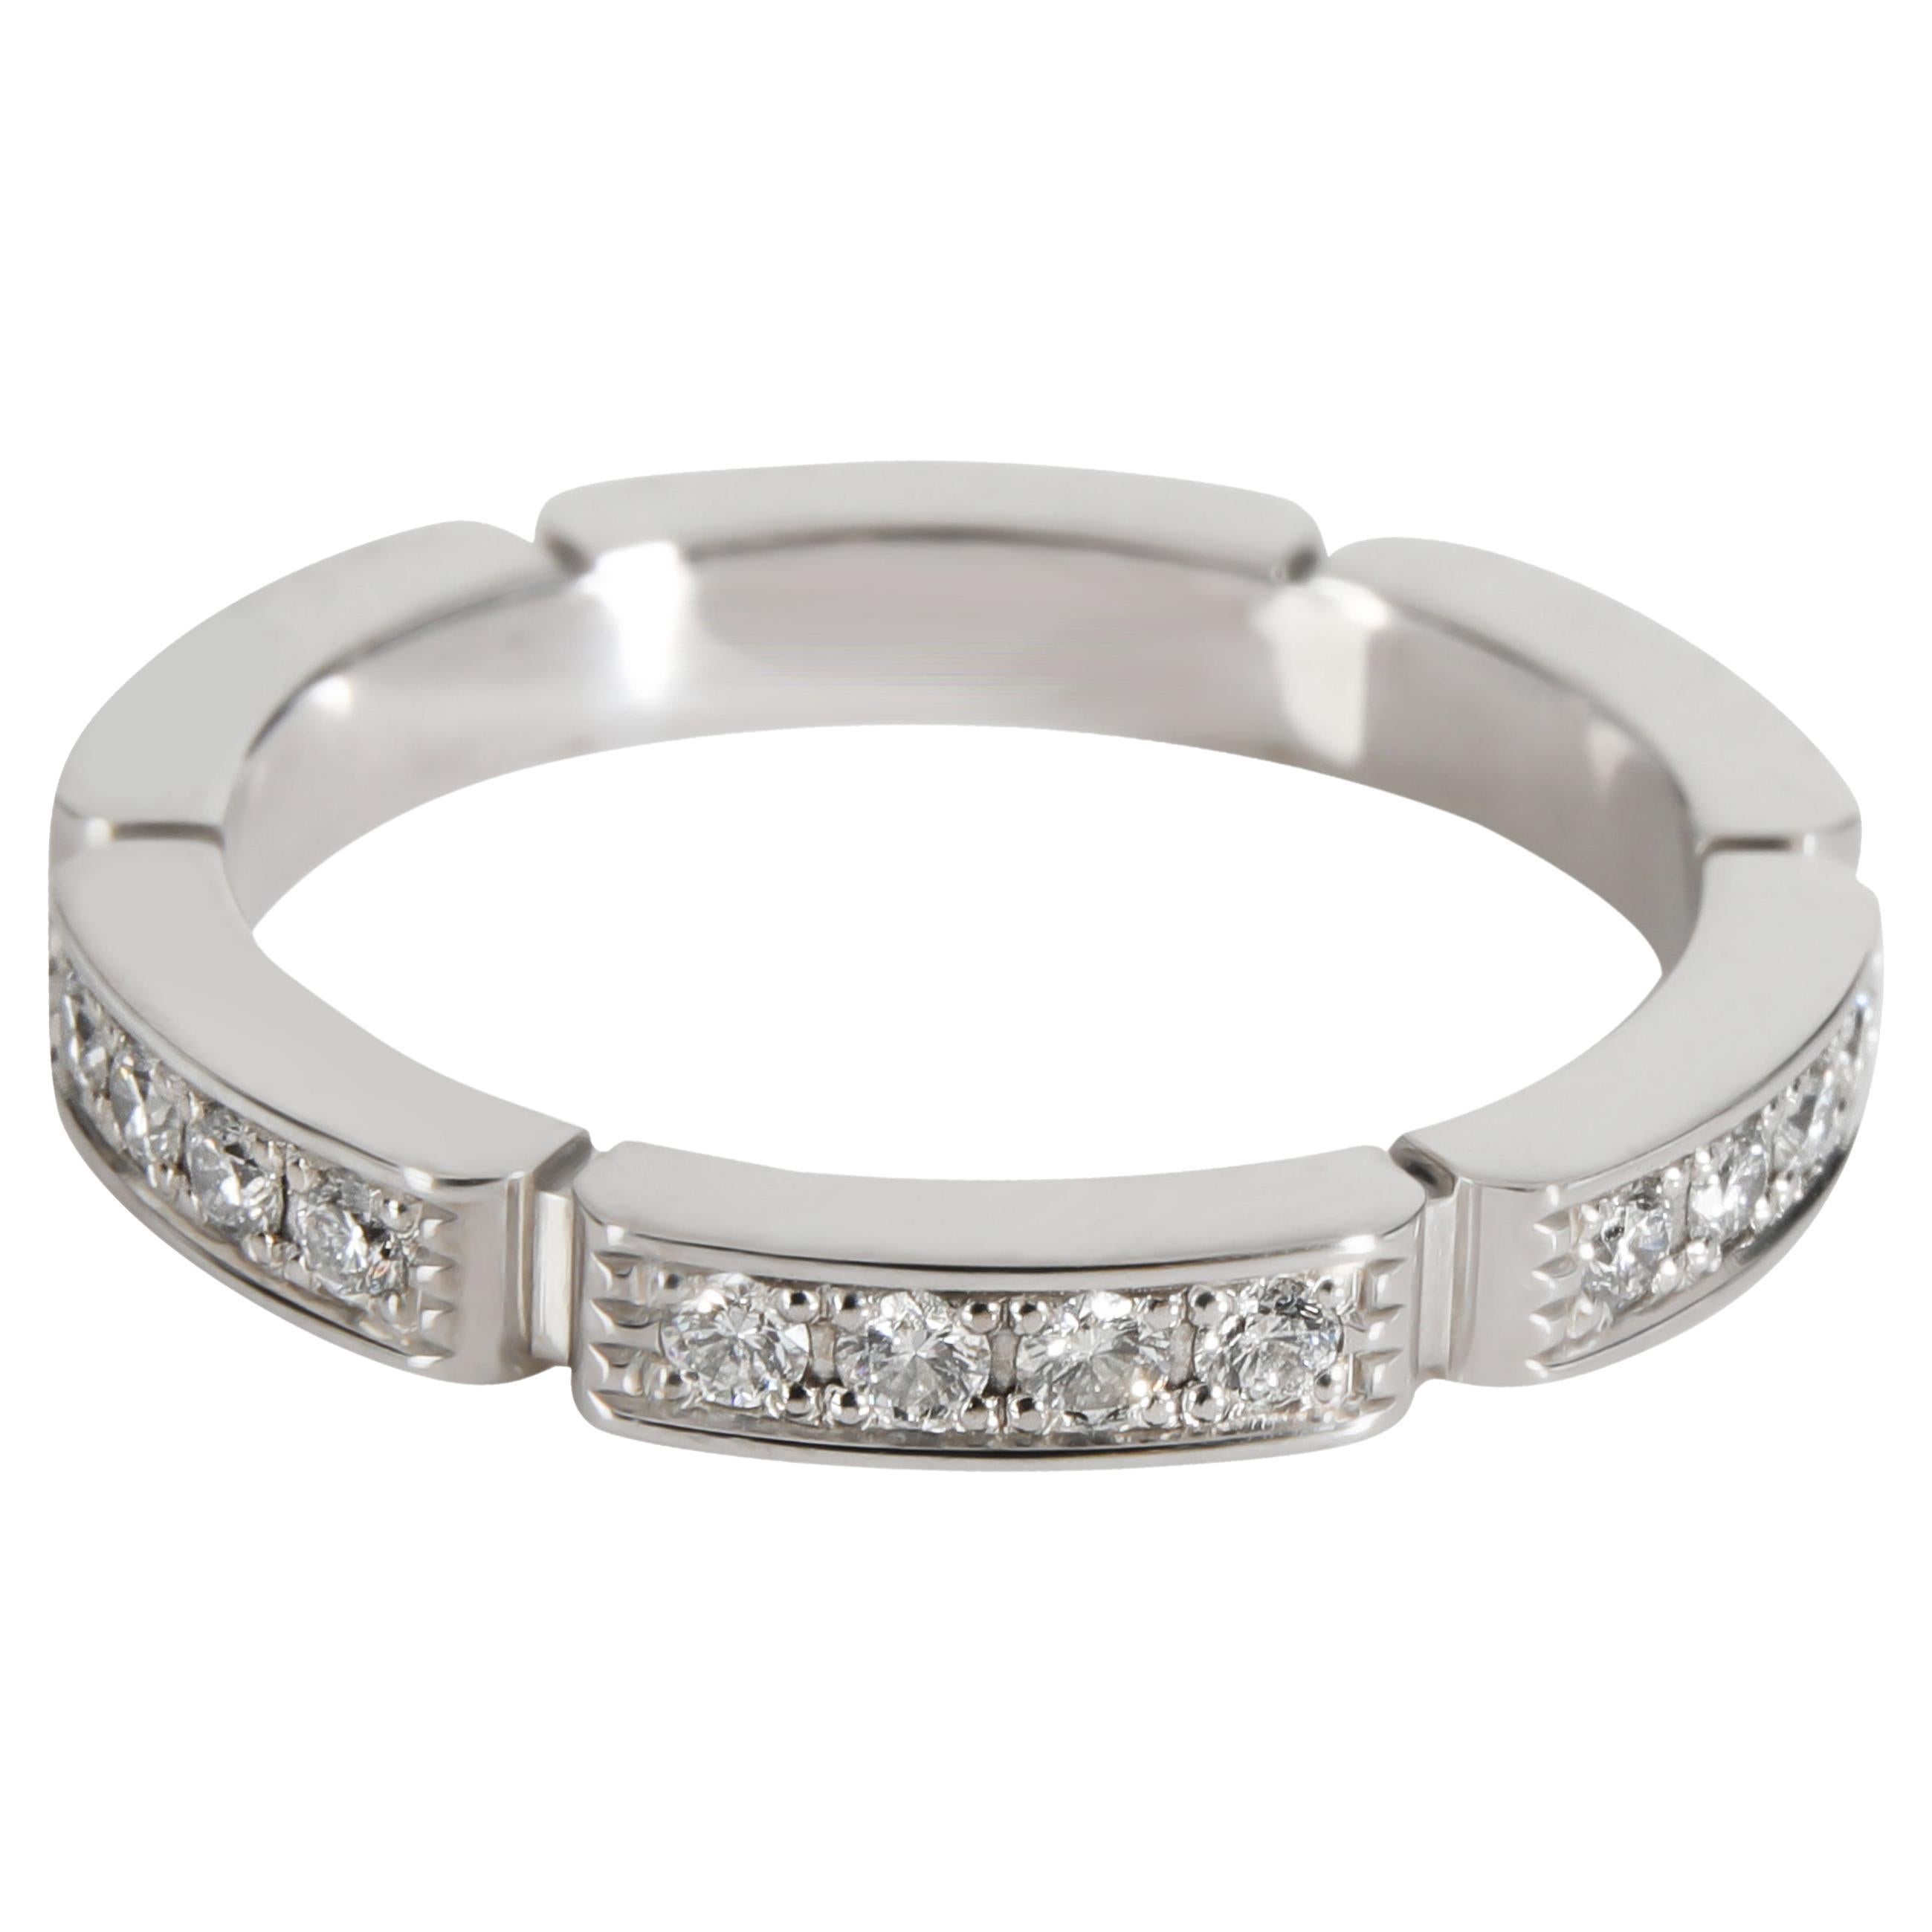 Cartier Maillon Panthere Diamond Wedding Band in 18K White Gold 0.15 CTW For Sale